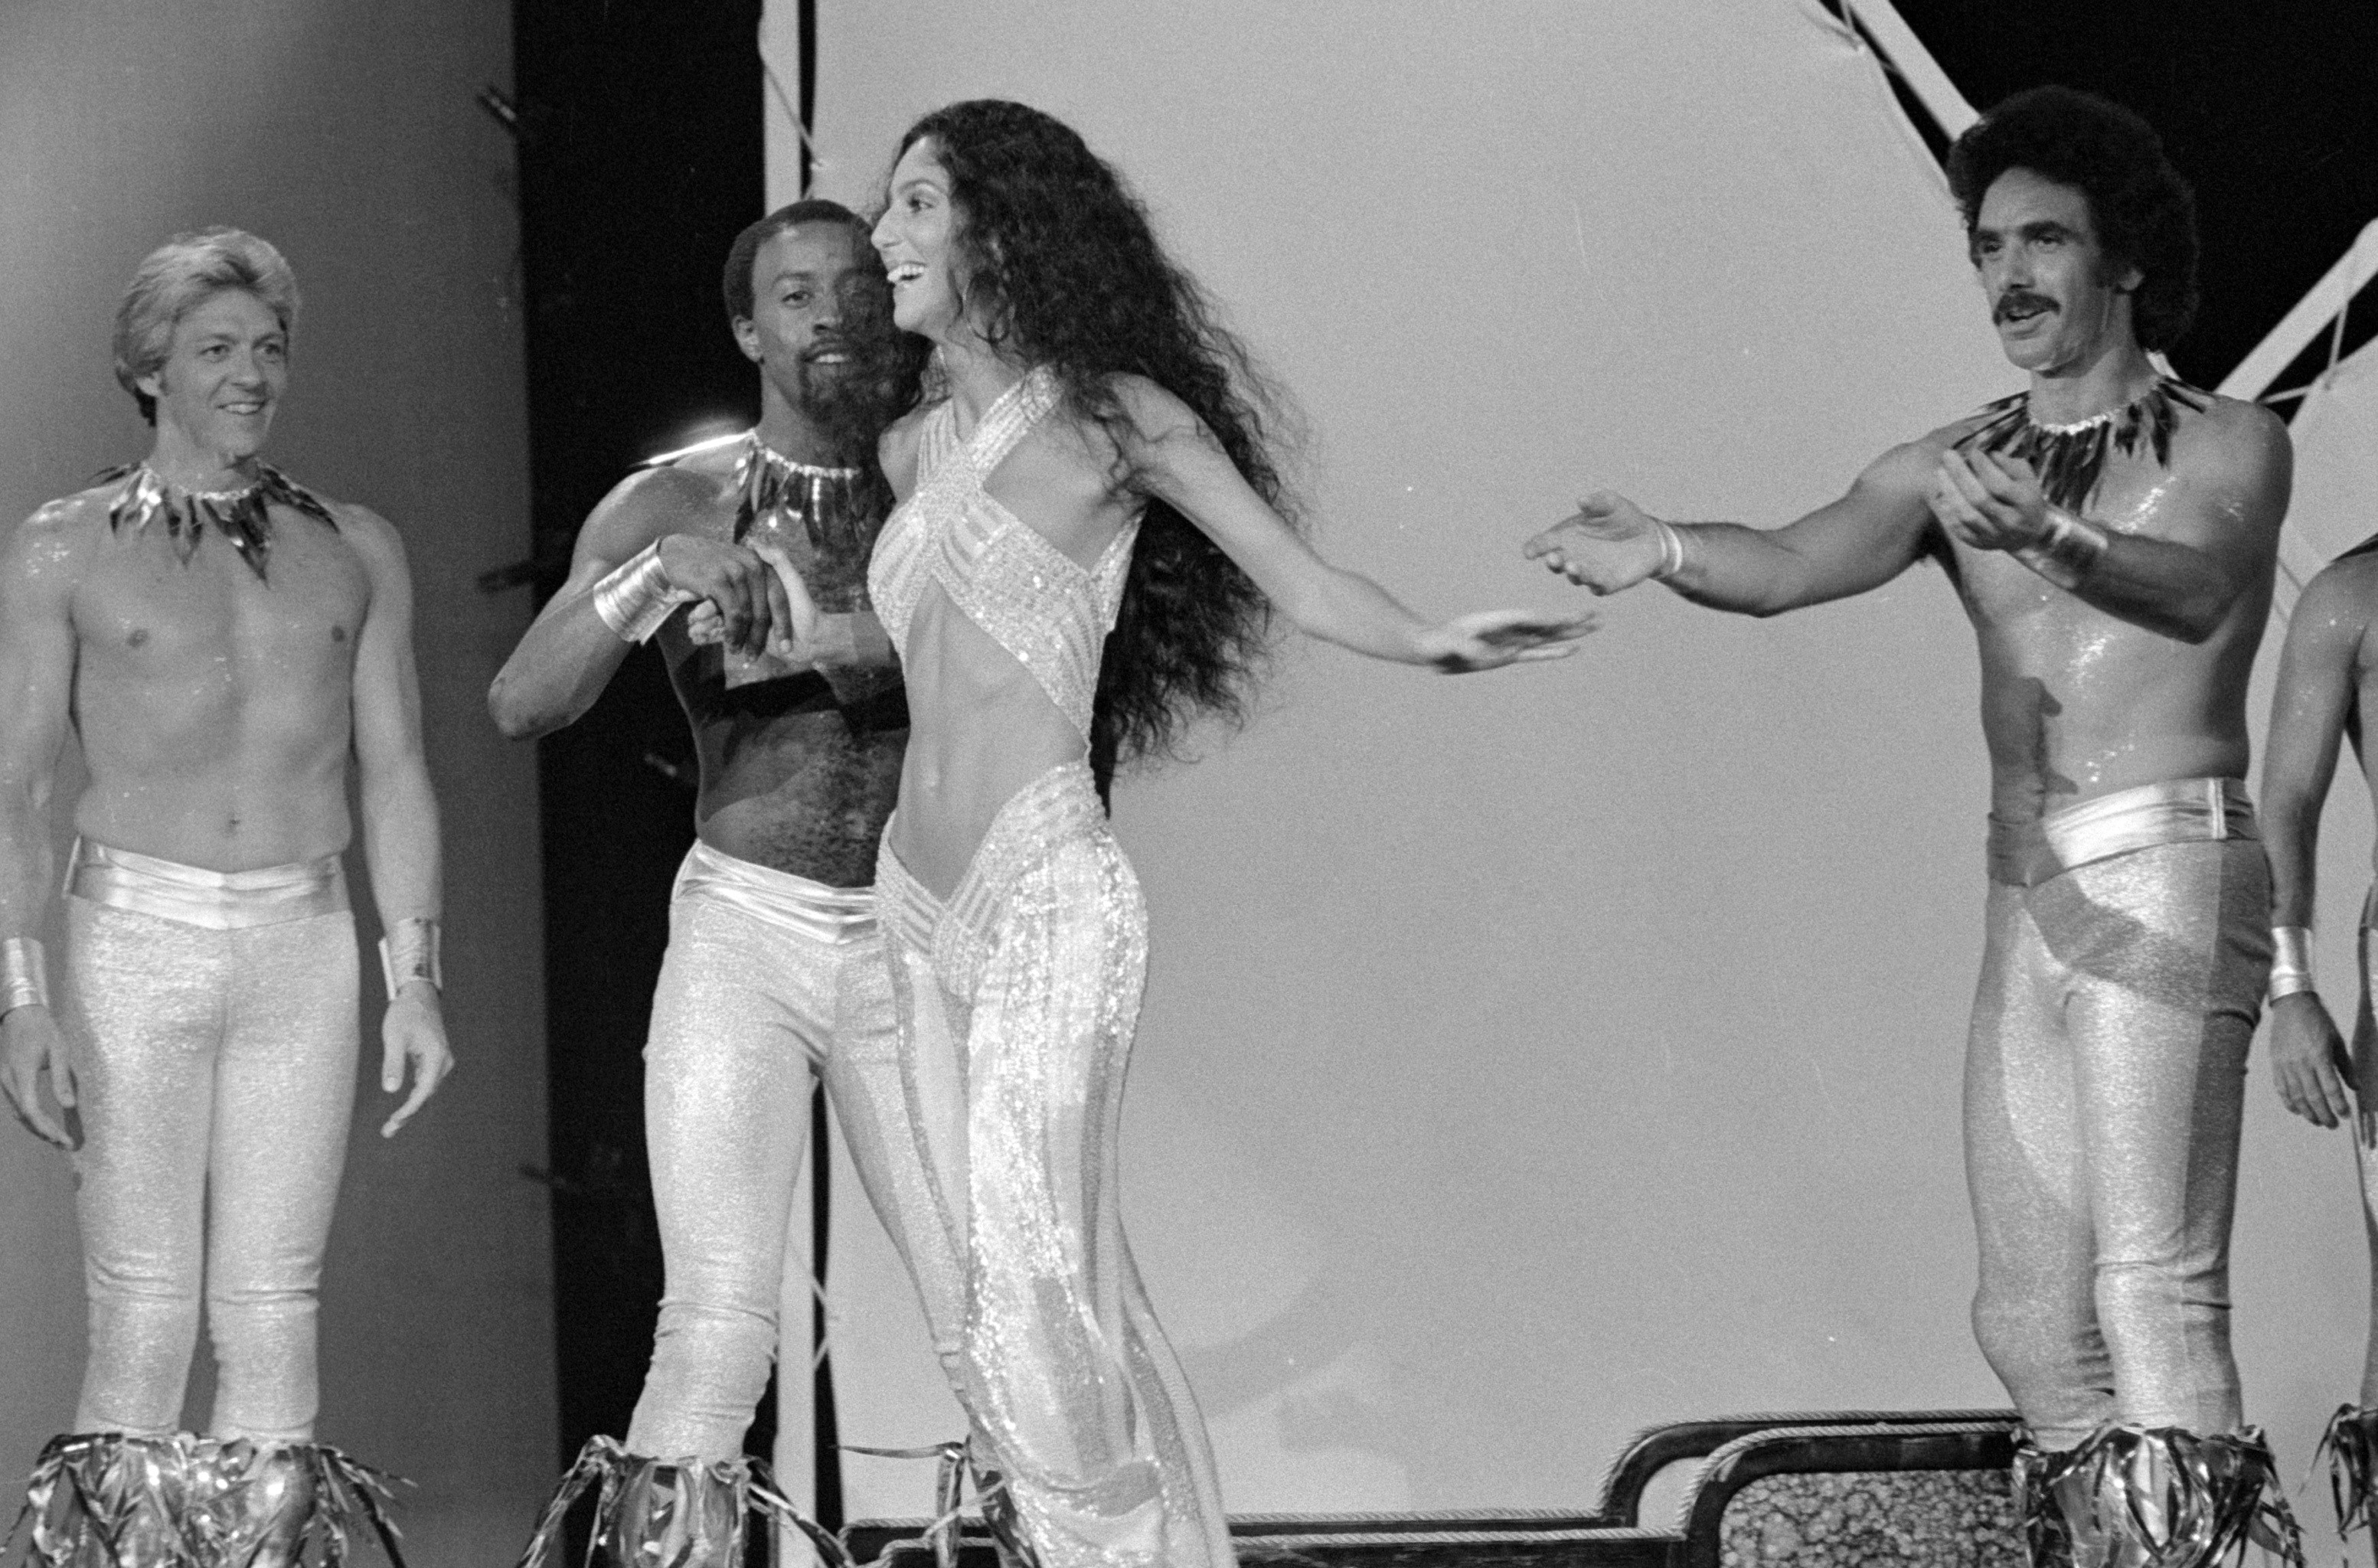 Cher durante THE ROCK MUSIC AWARDS, em 1975 (Foto: Getty Images)